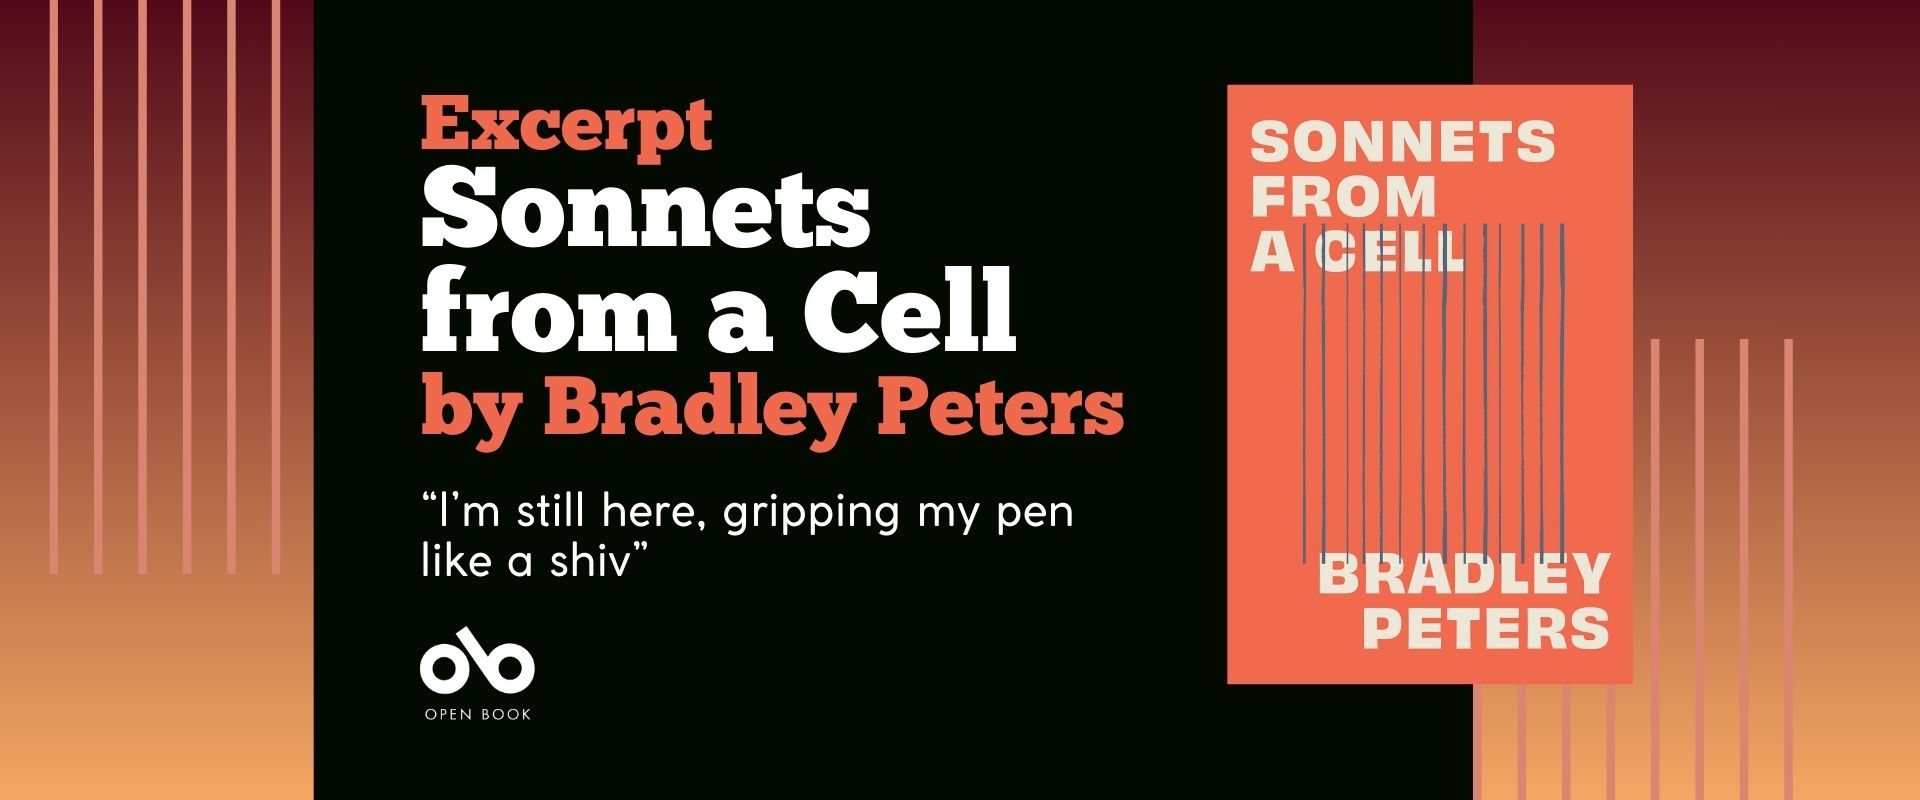 Orange and black banner image with the cover of Bradley Peters' poetry collection Sonnets from a Cell. Text reads excerpt Sonnets from a Cell by Bradley Peter. I'm still here, gripping my pen like a shiv. Open Book logo bottom left.